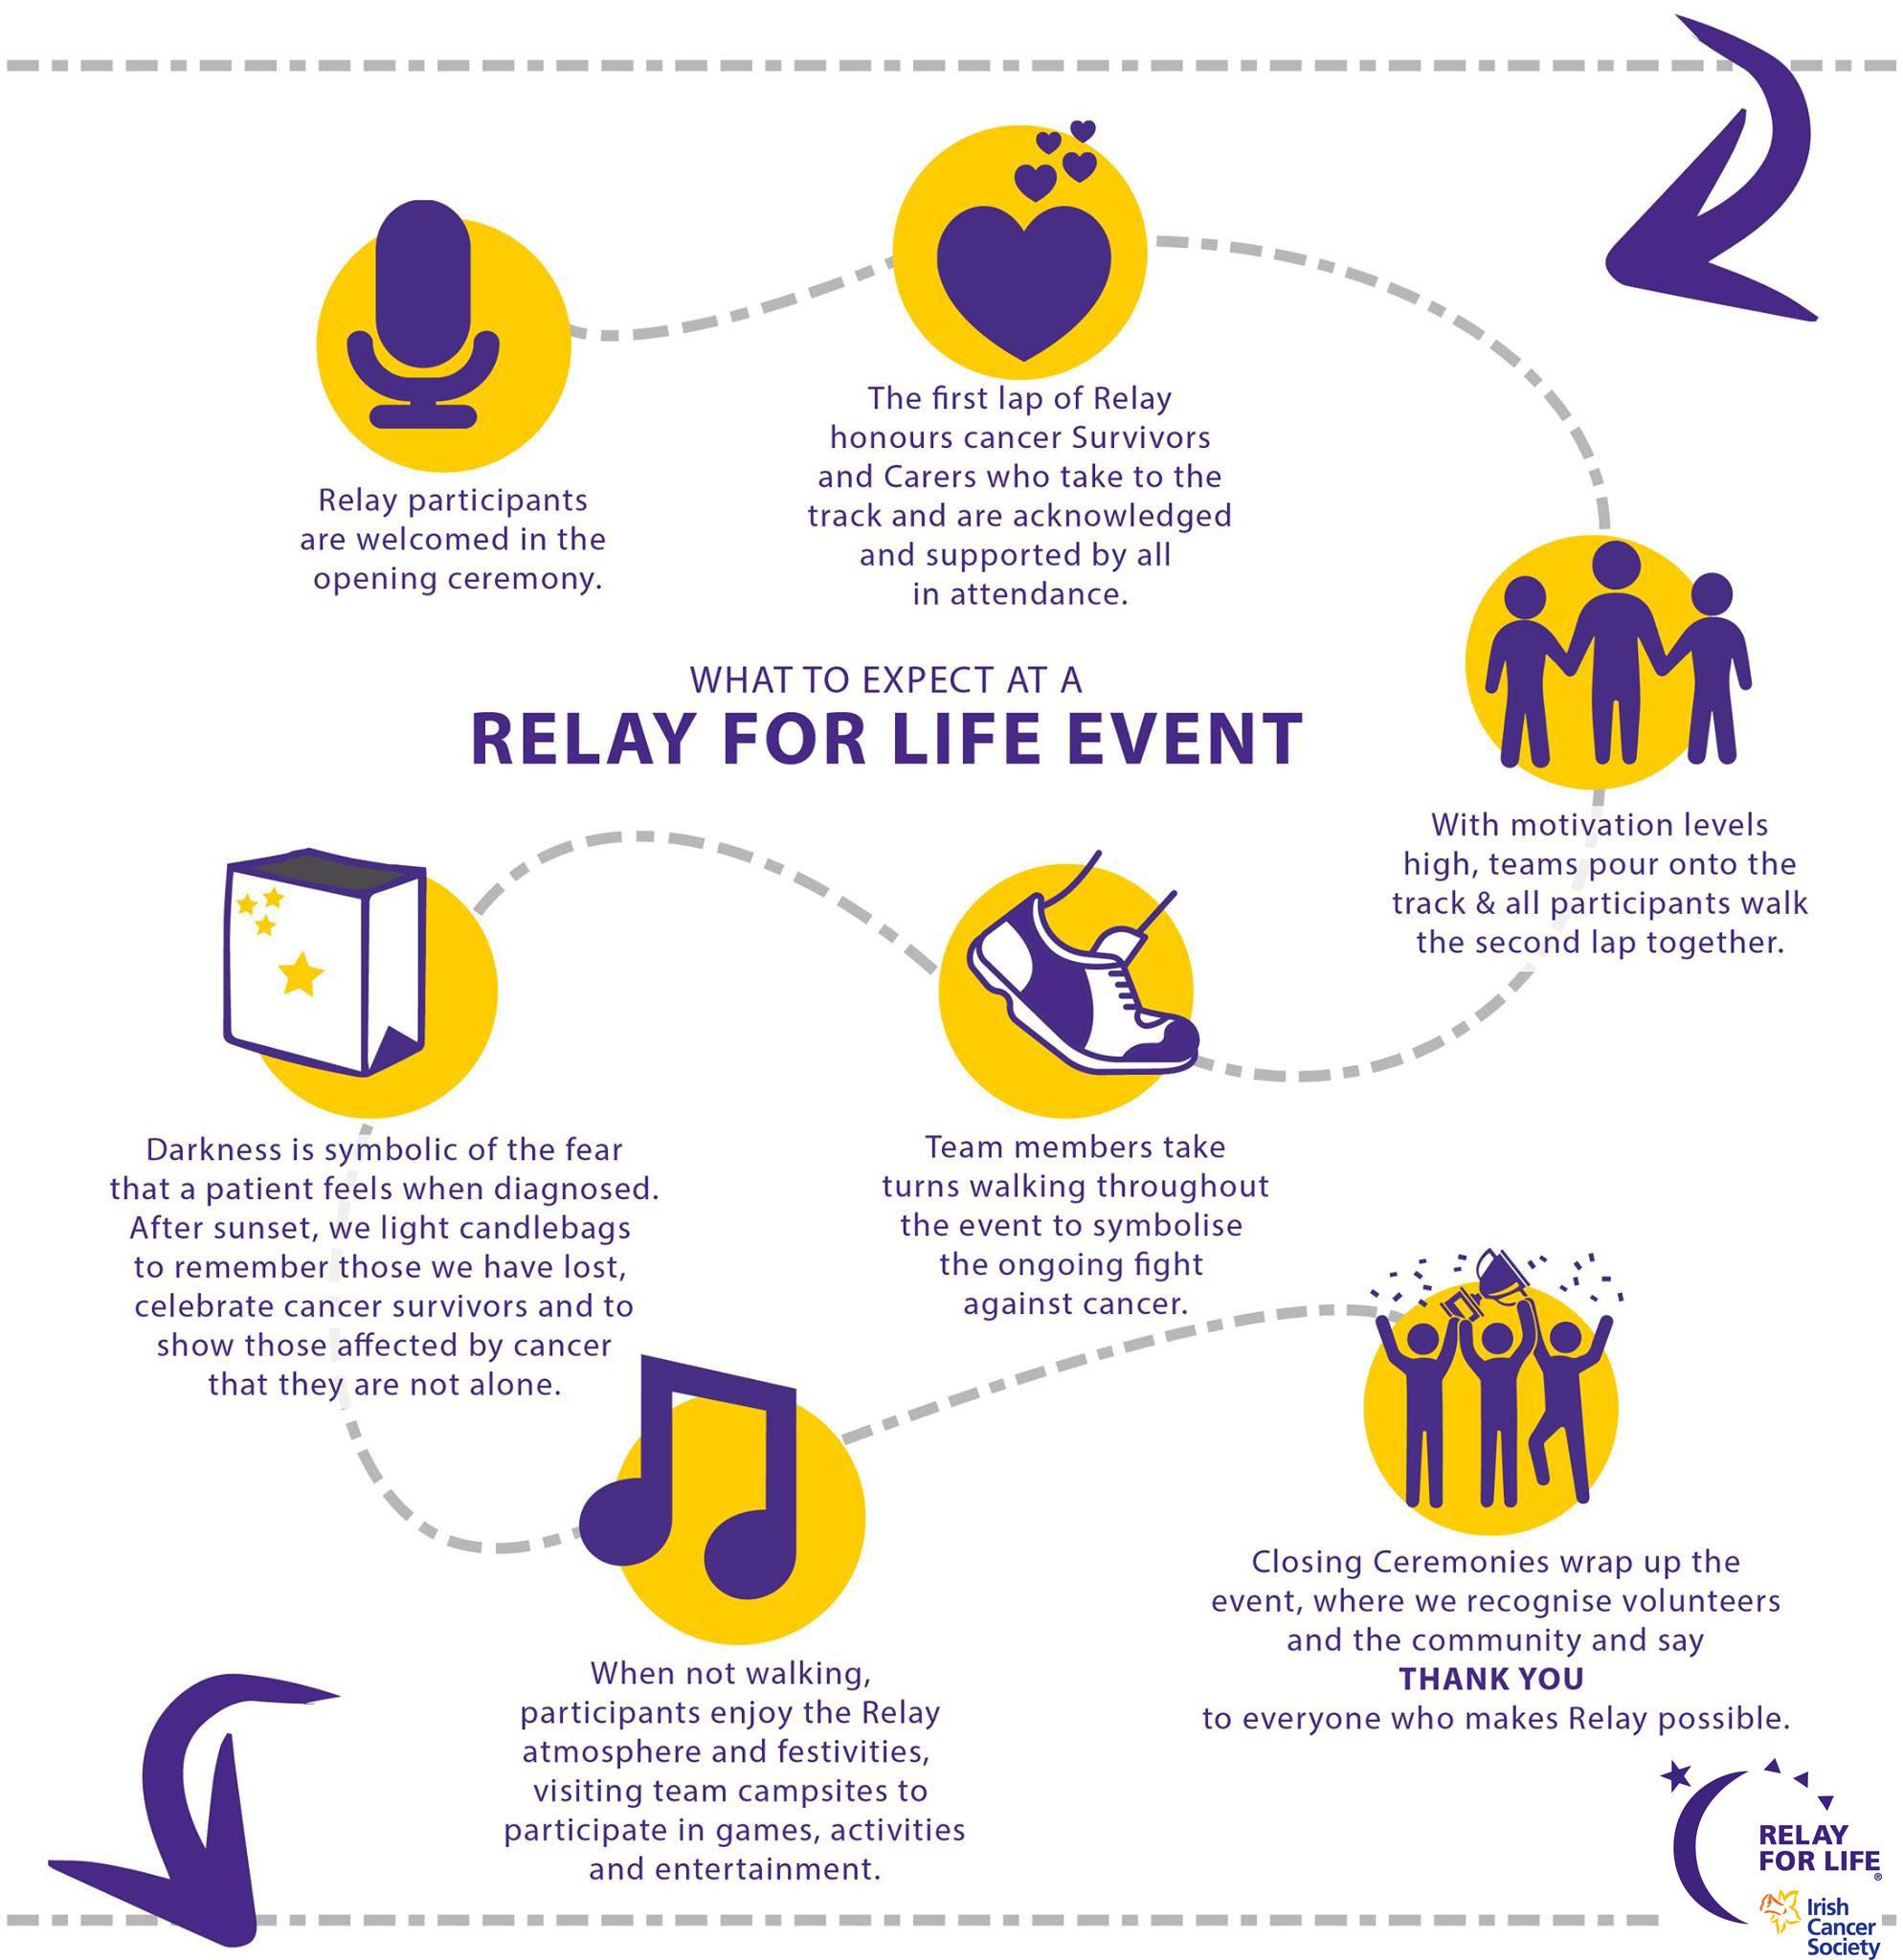 What to expect at Relay For Life